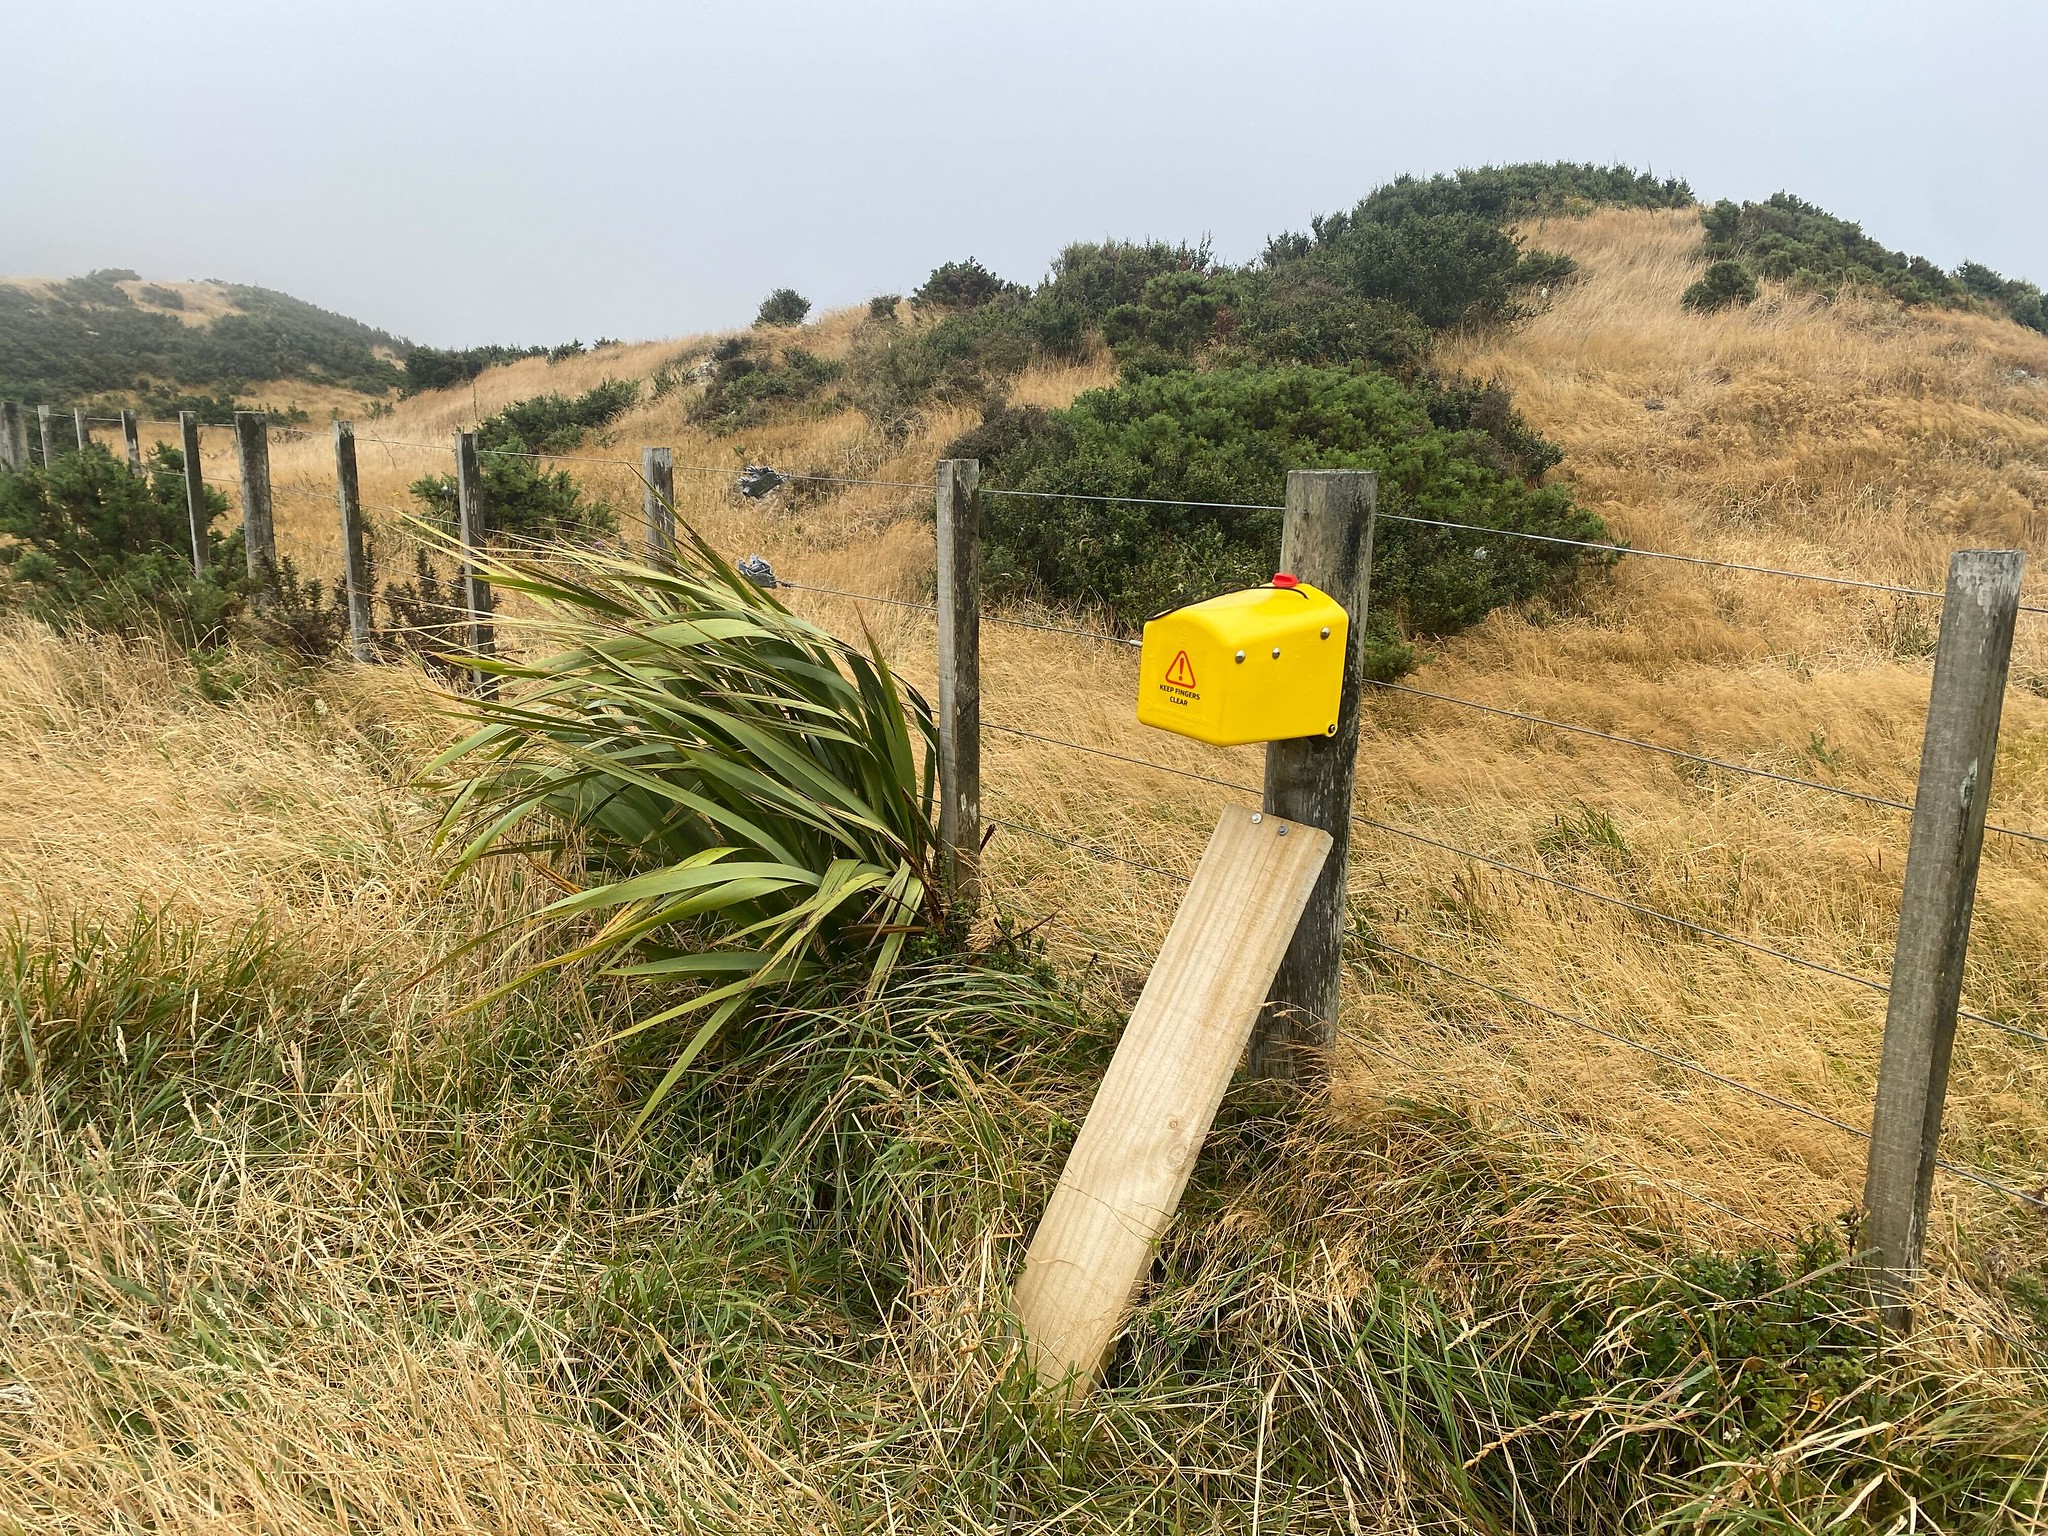 A Flipping Timmy mounted on a fence post in a tussock environment. There is a plank of wood acting as a ramp to the Flipping Timmy.